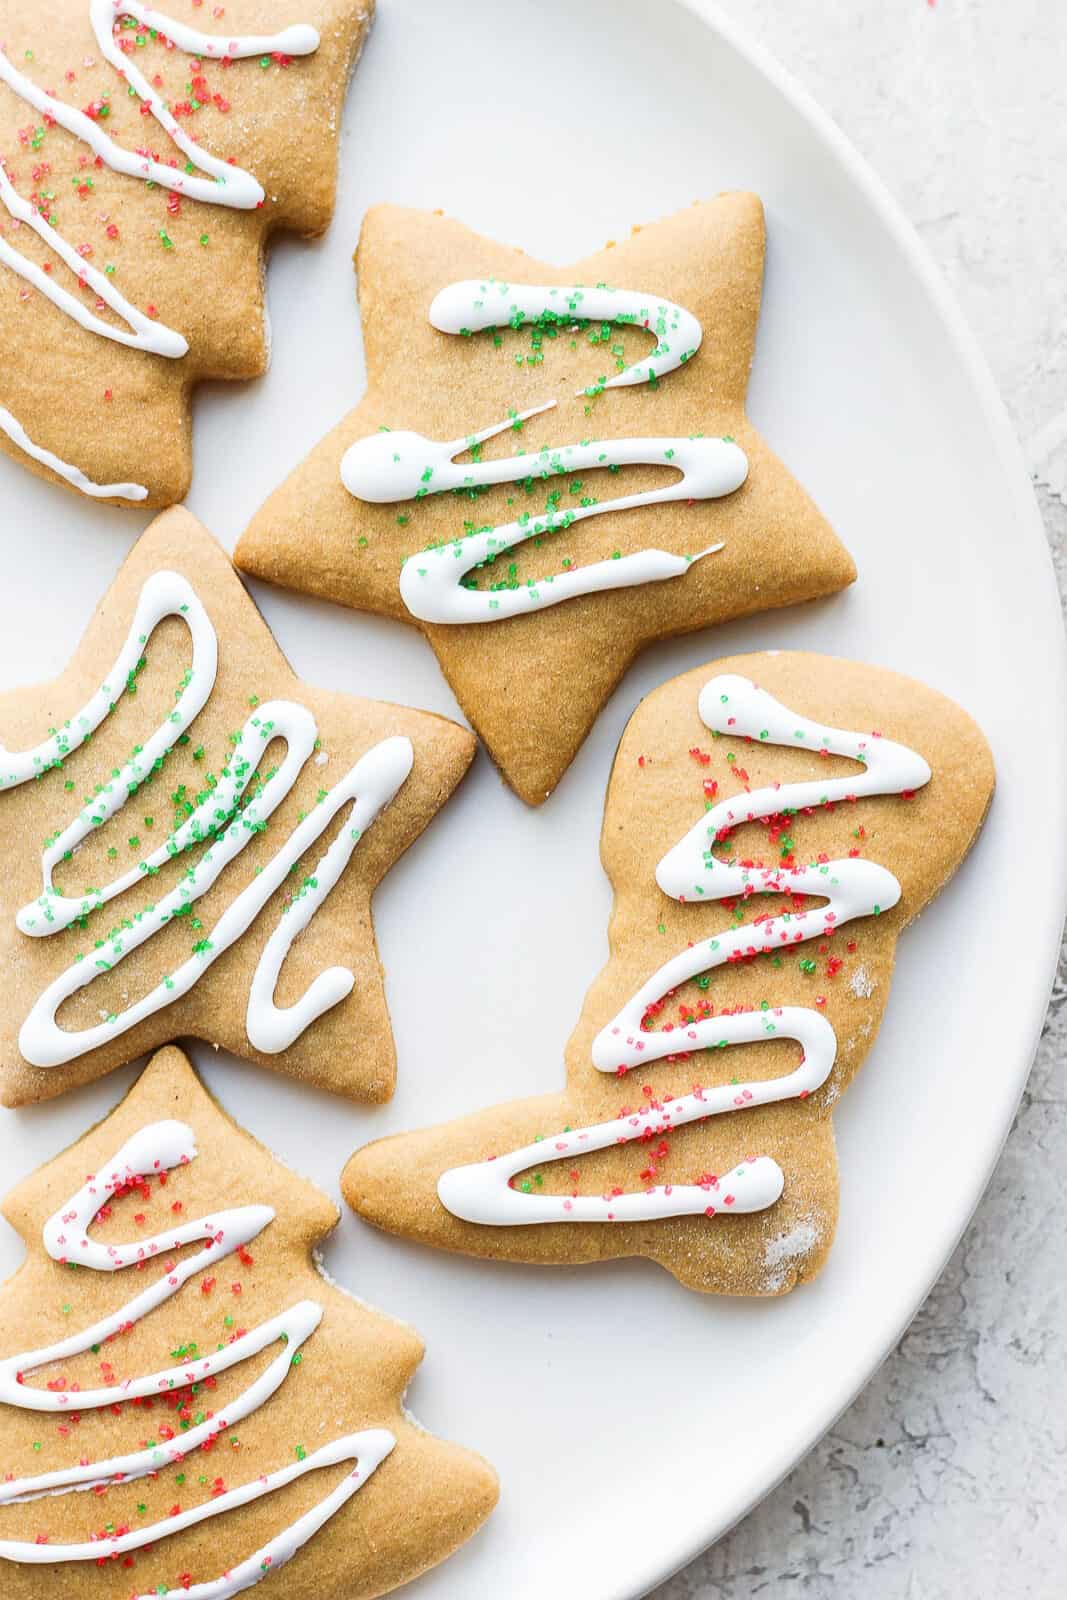 Decorated cut-out cookies on a plate.